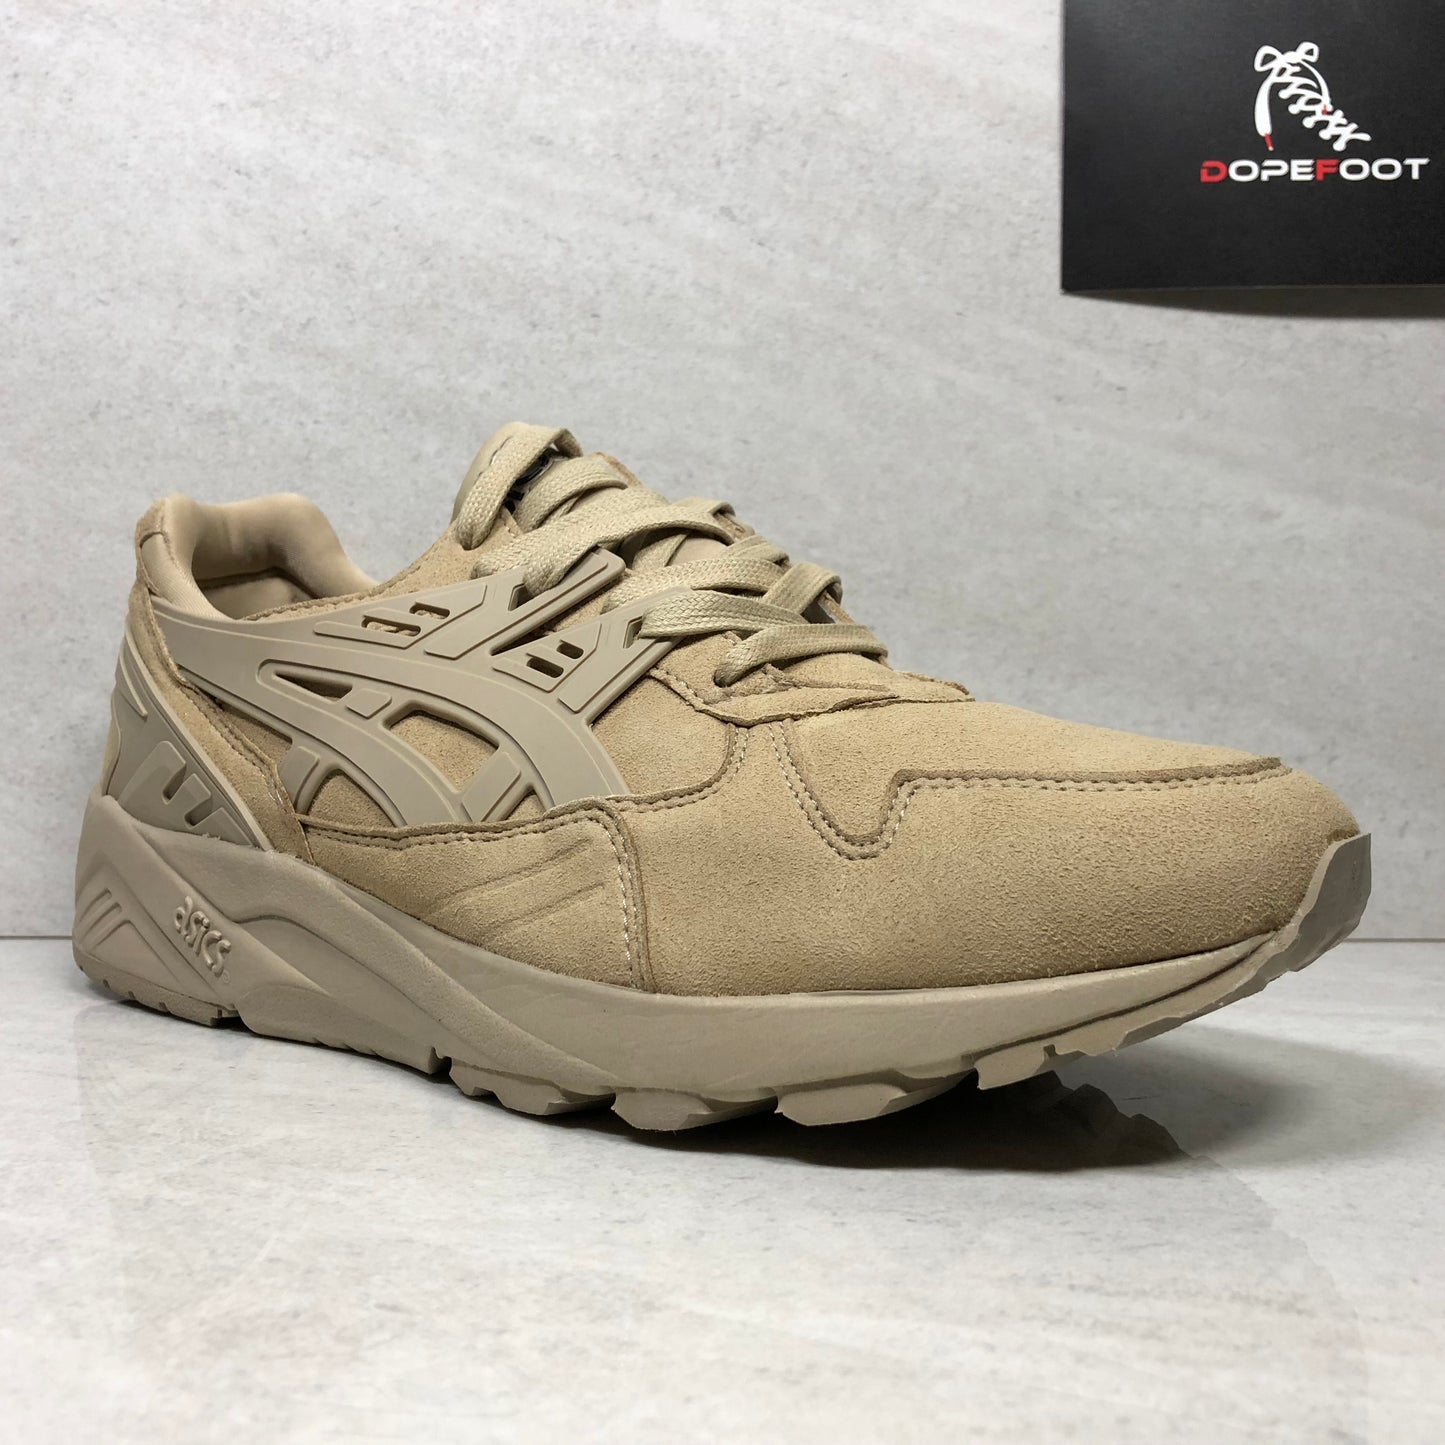 DS ASICS Kayano Trainer Sable Taille 9/Taille 12 tan H72QJ 0505